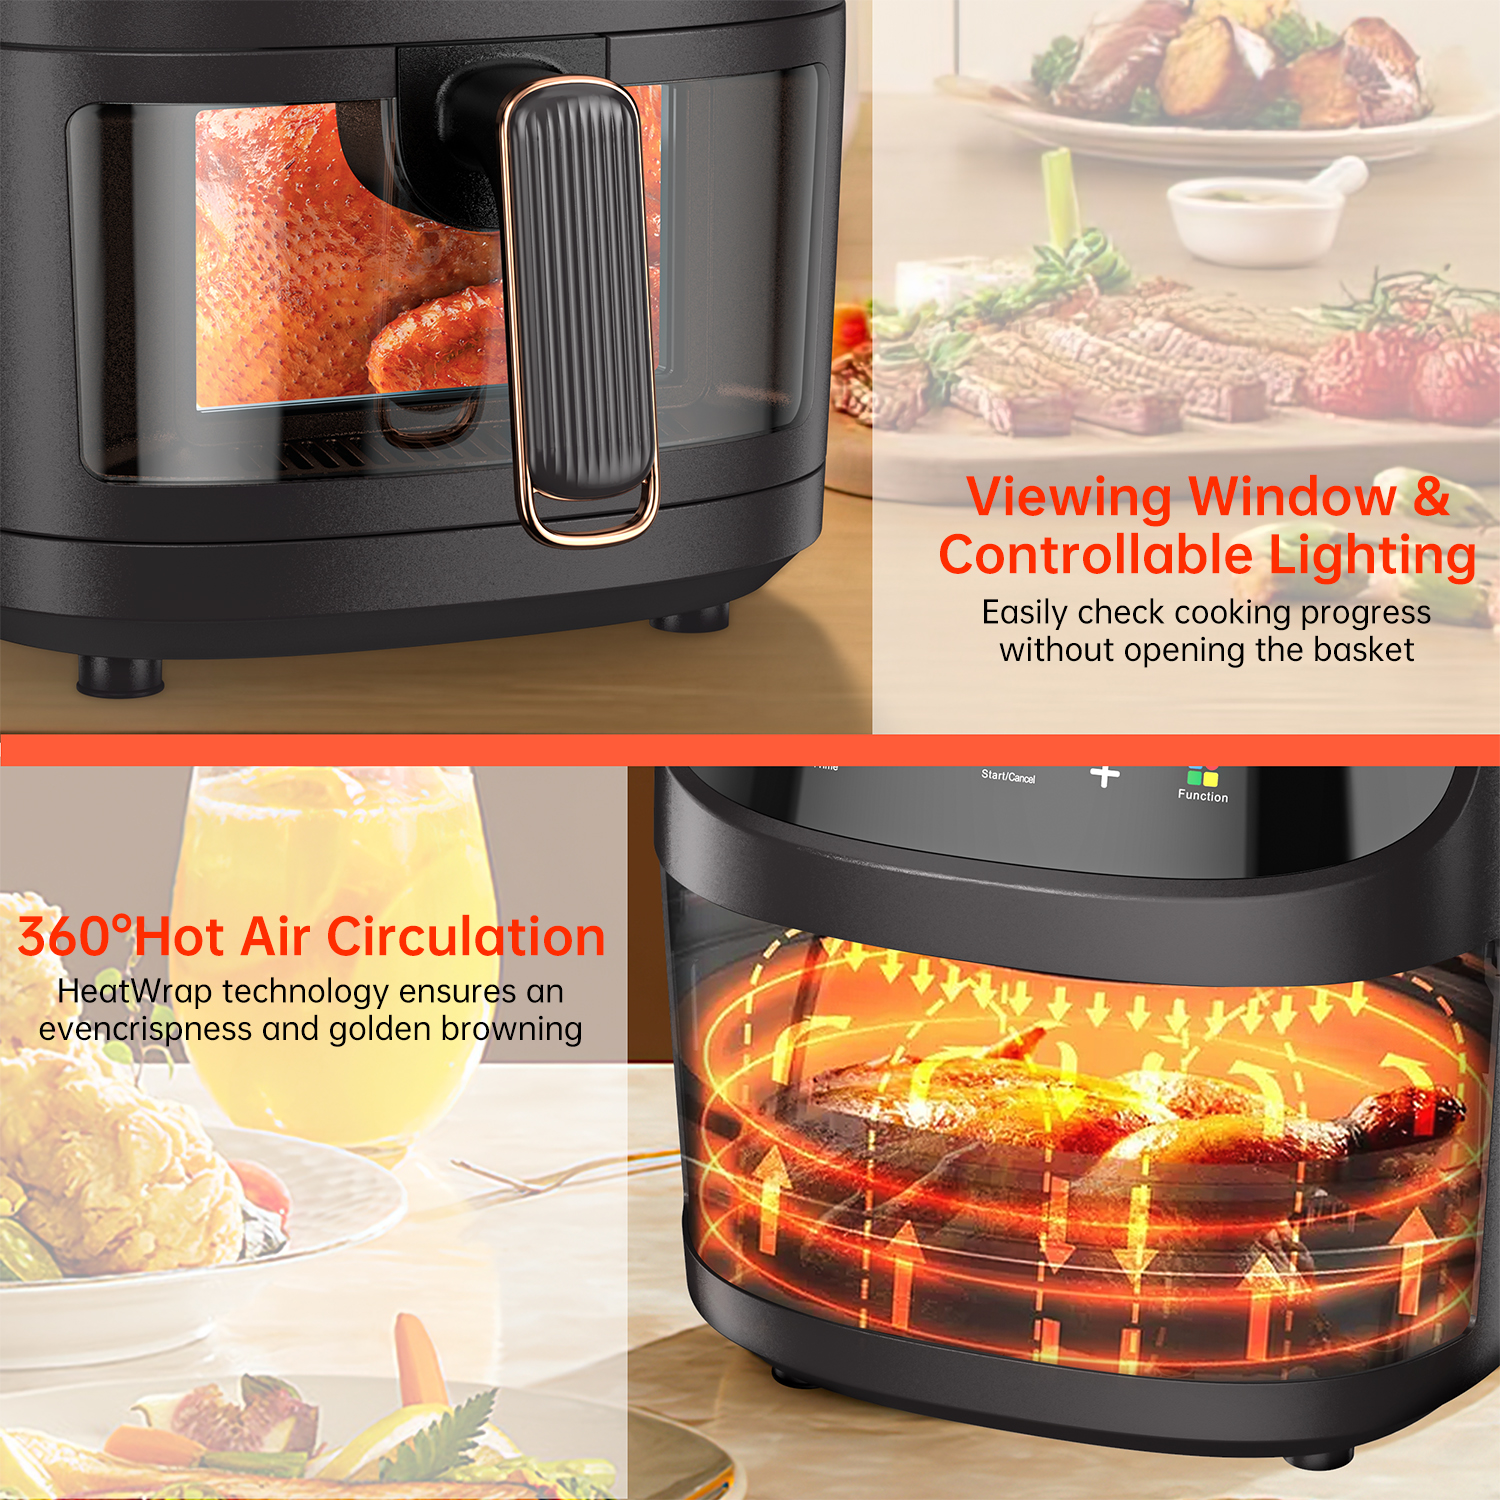 Air Fryer 5L Large Capacity Touch Screen Smart Fryers Household Multi-function Window Visible Air fryer that Crisps, Roasts, Reheats, & Dehydrates - image 3 of 7